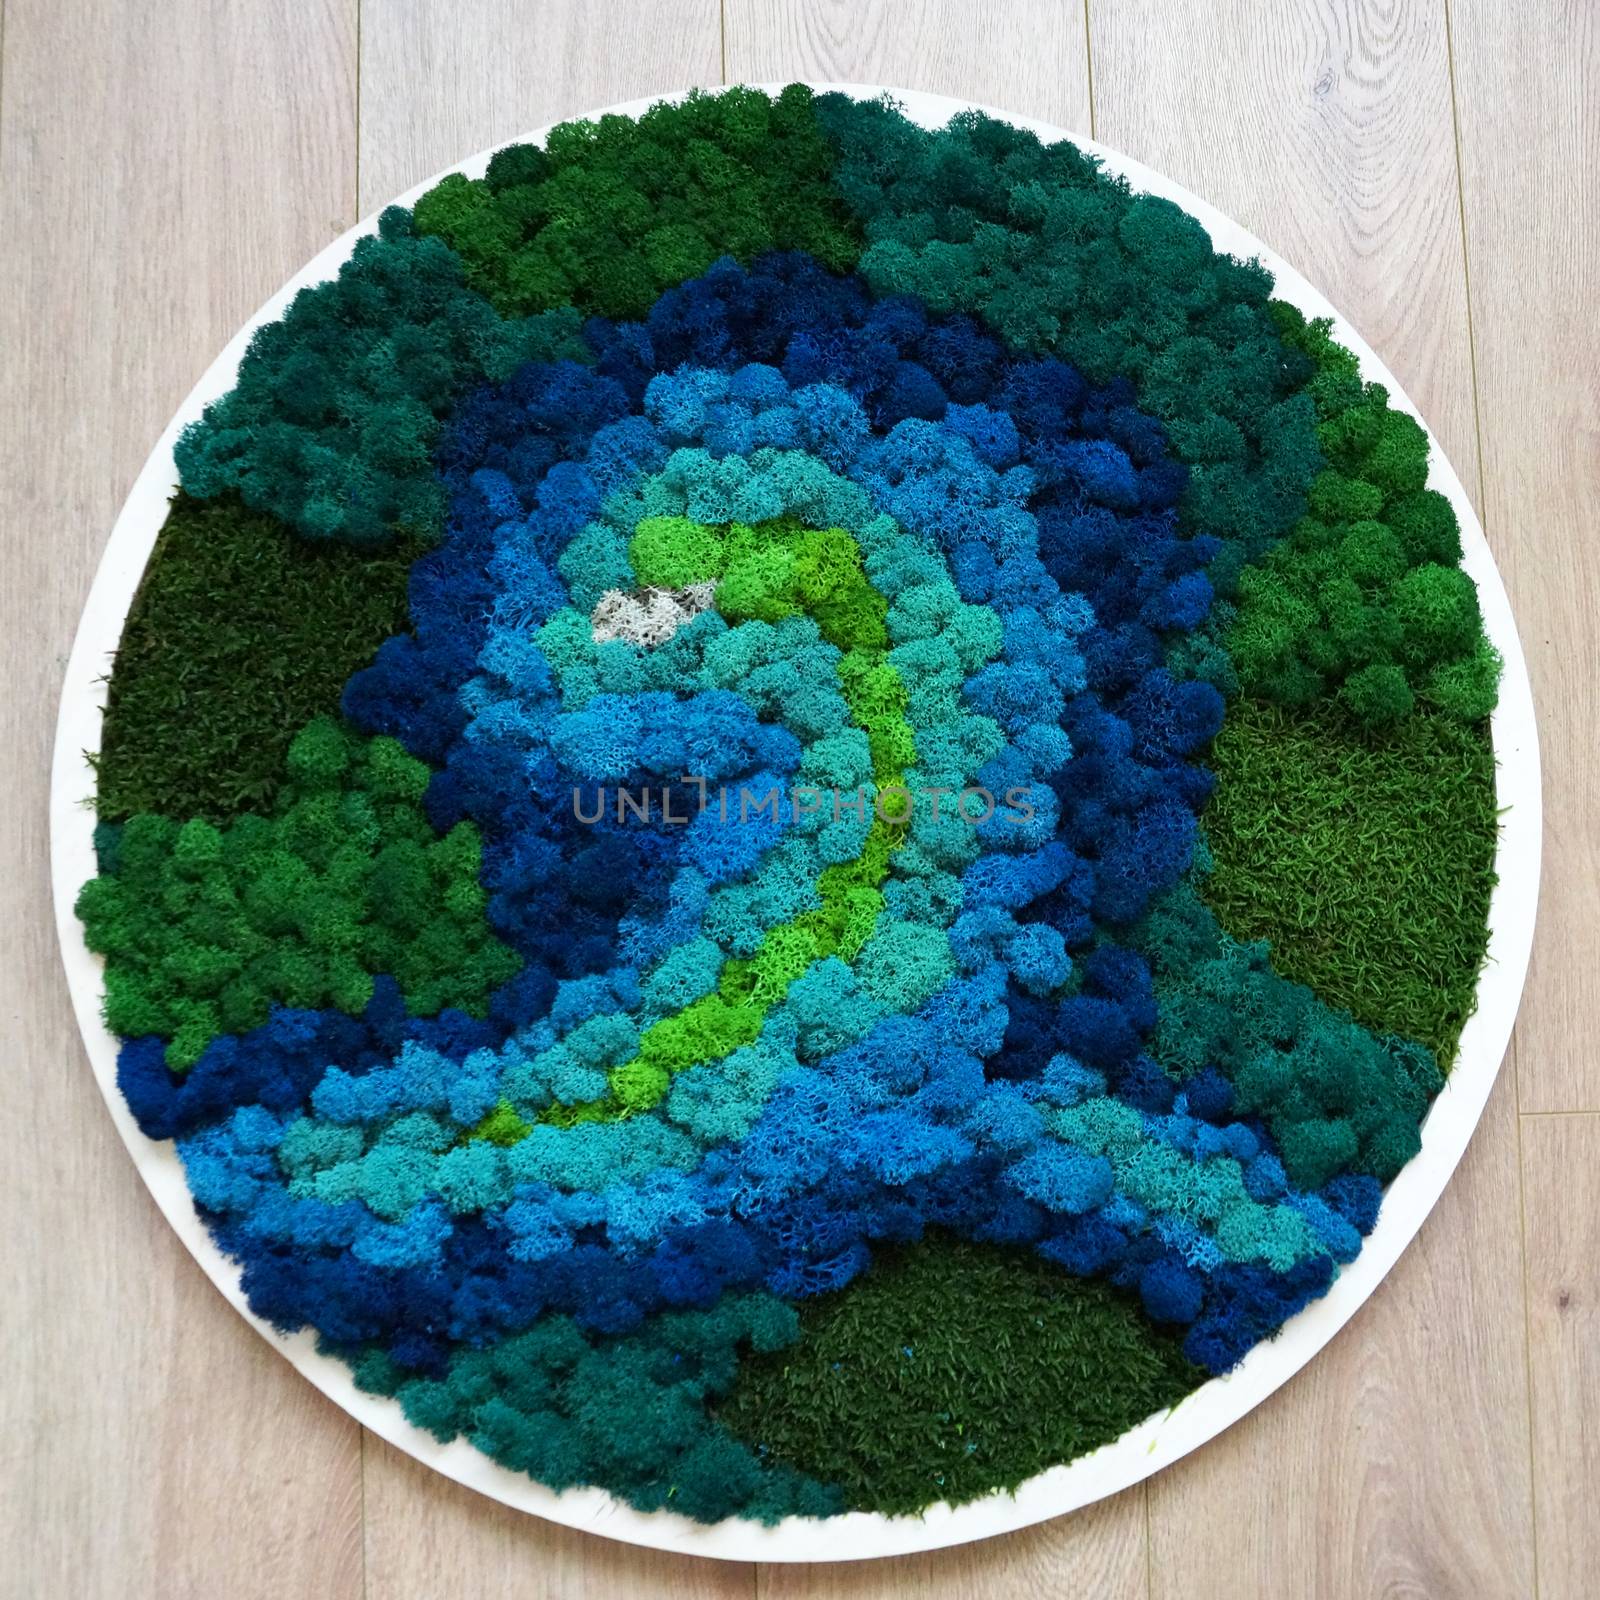 round panel from colored stabilized moss on a wooden background by Annado